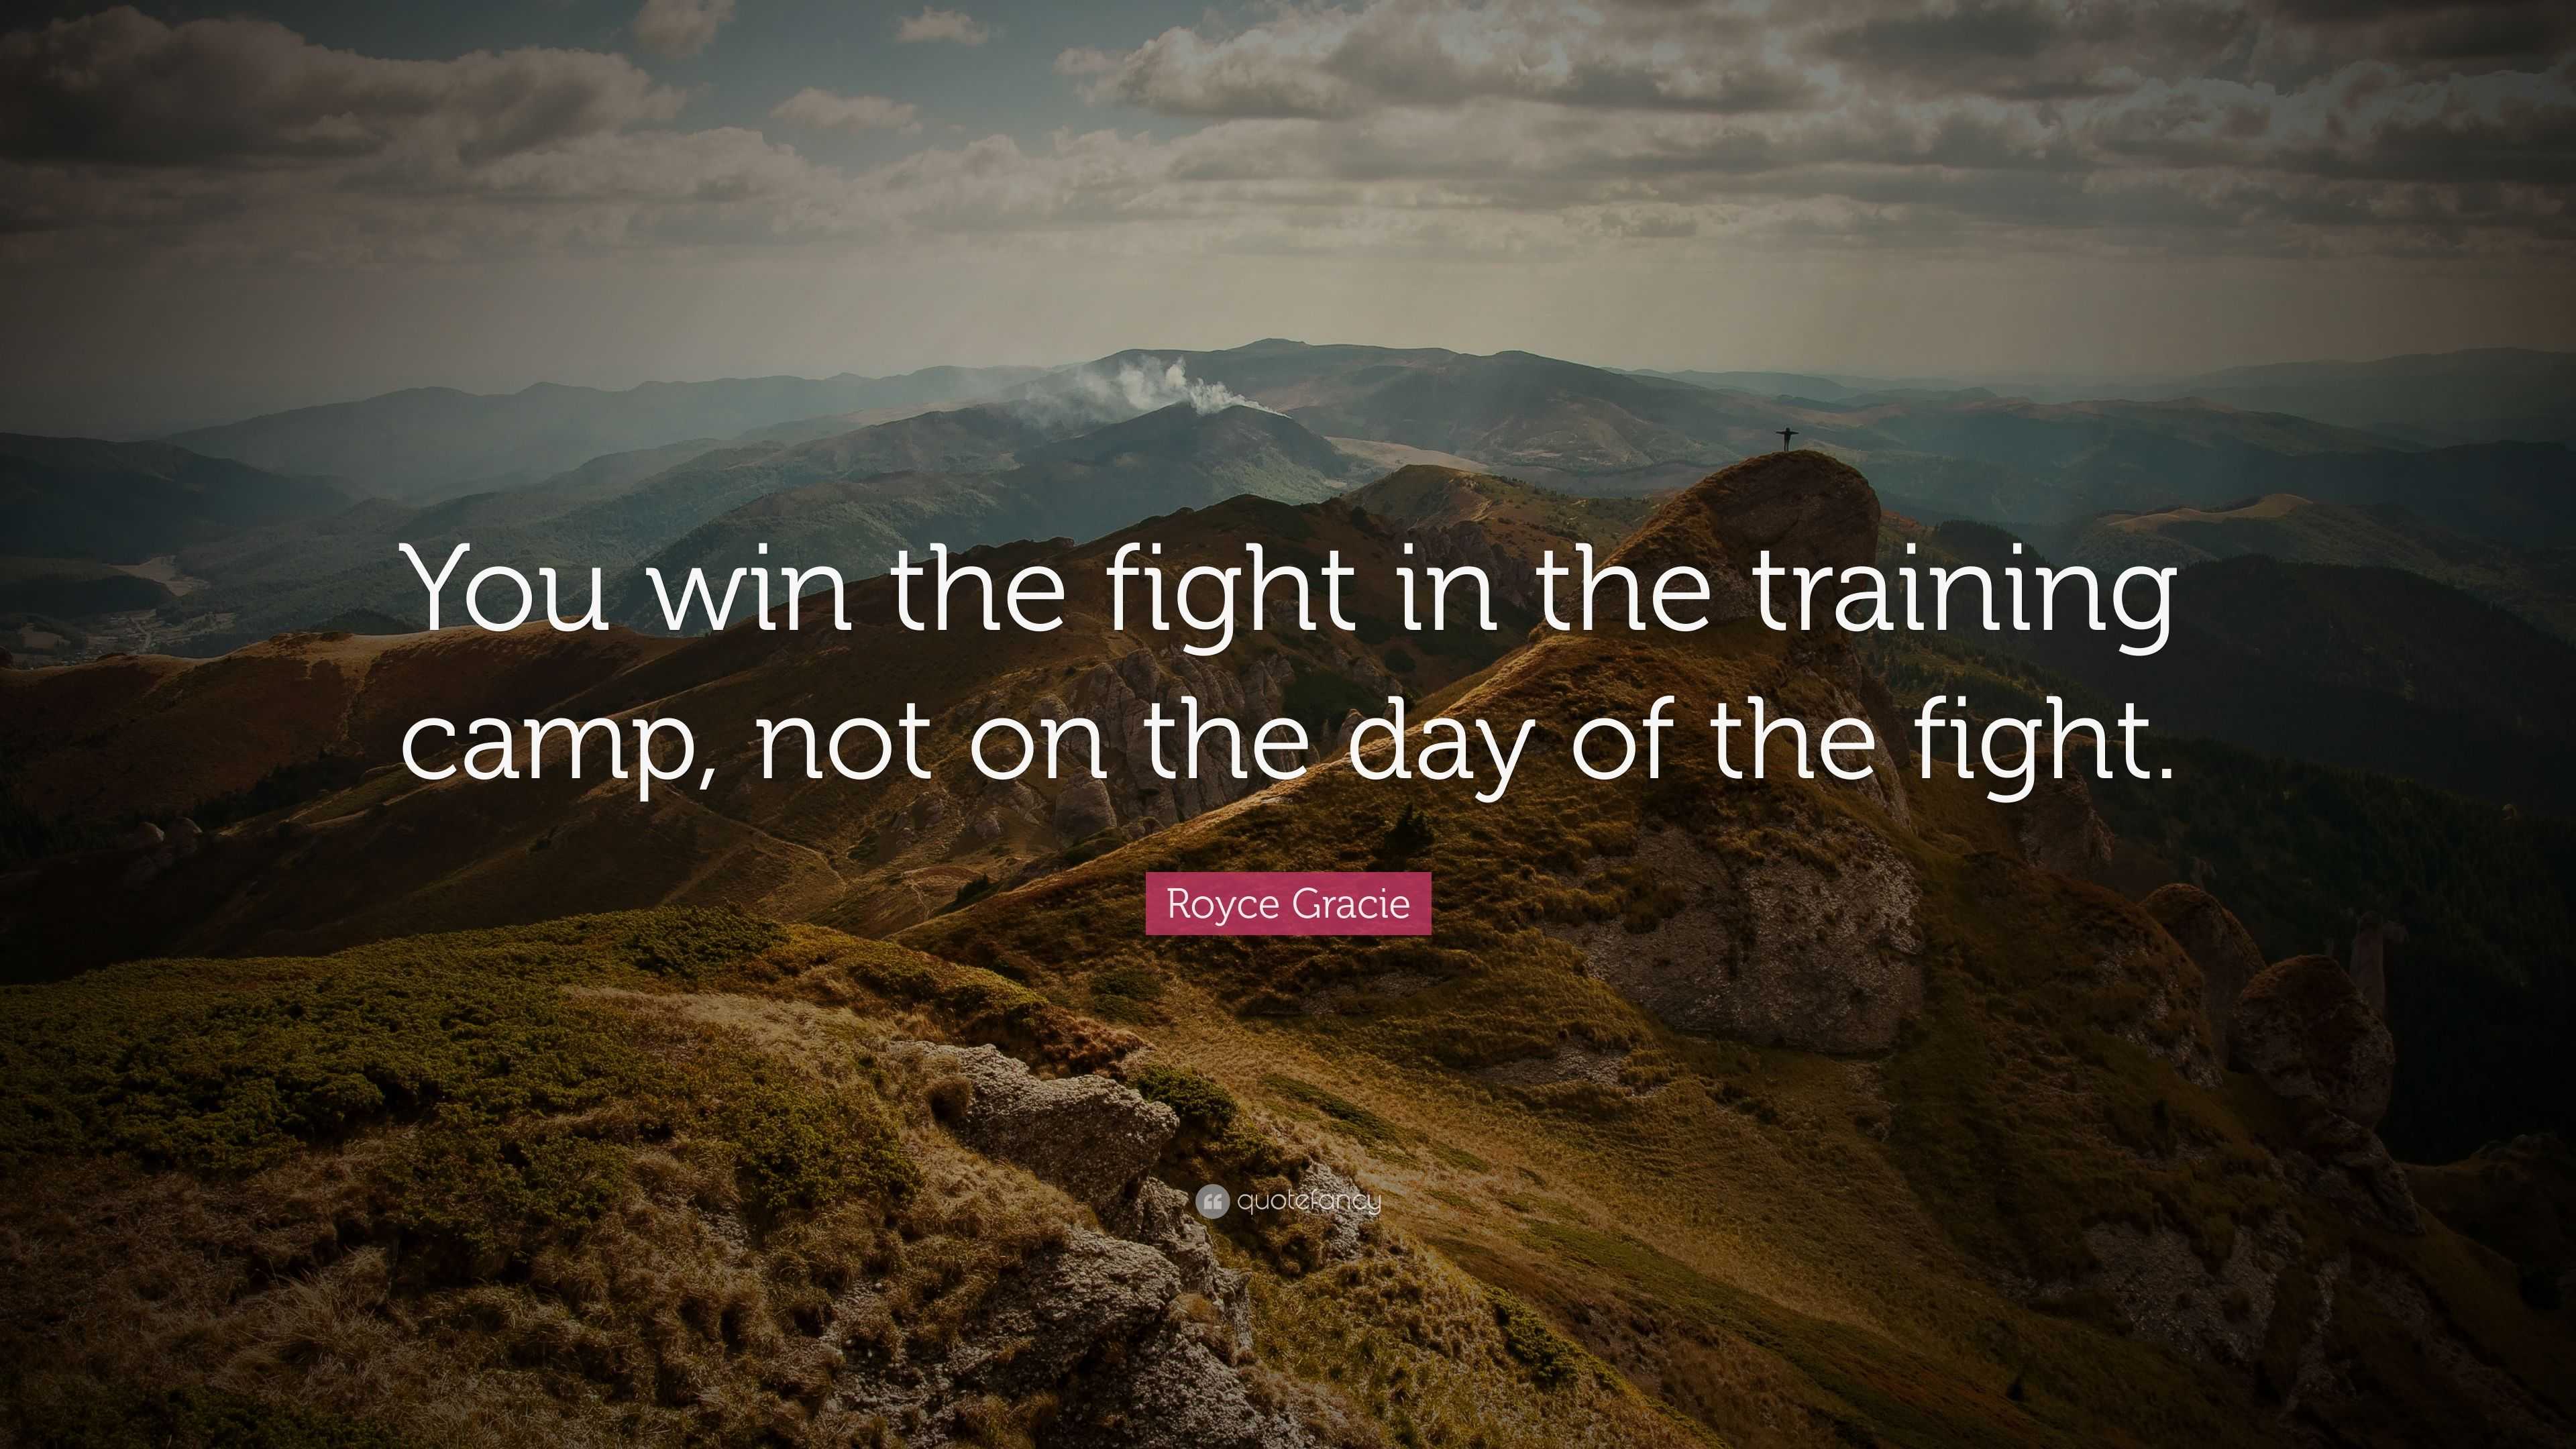 Royce Gracie Quote: “You win the fight in the training camp, not on the